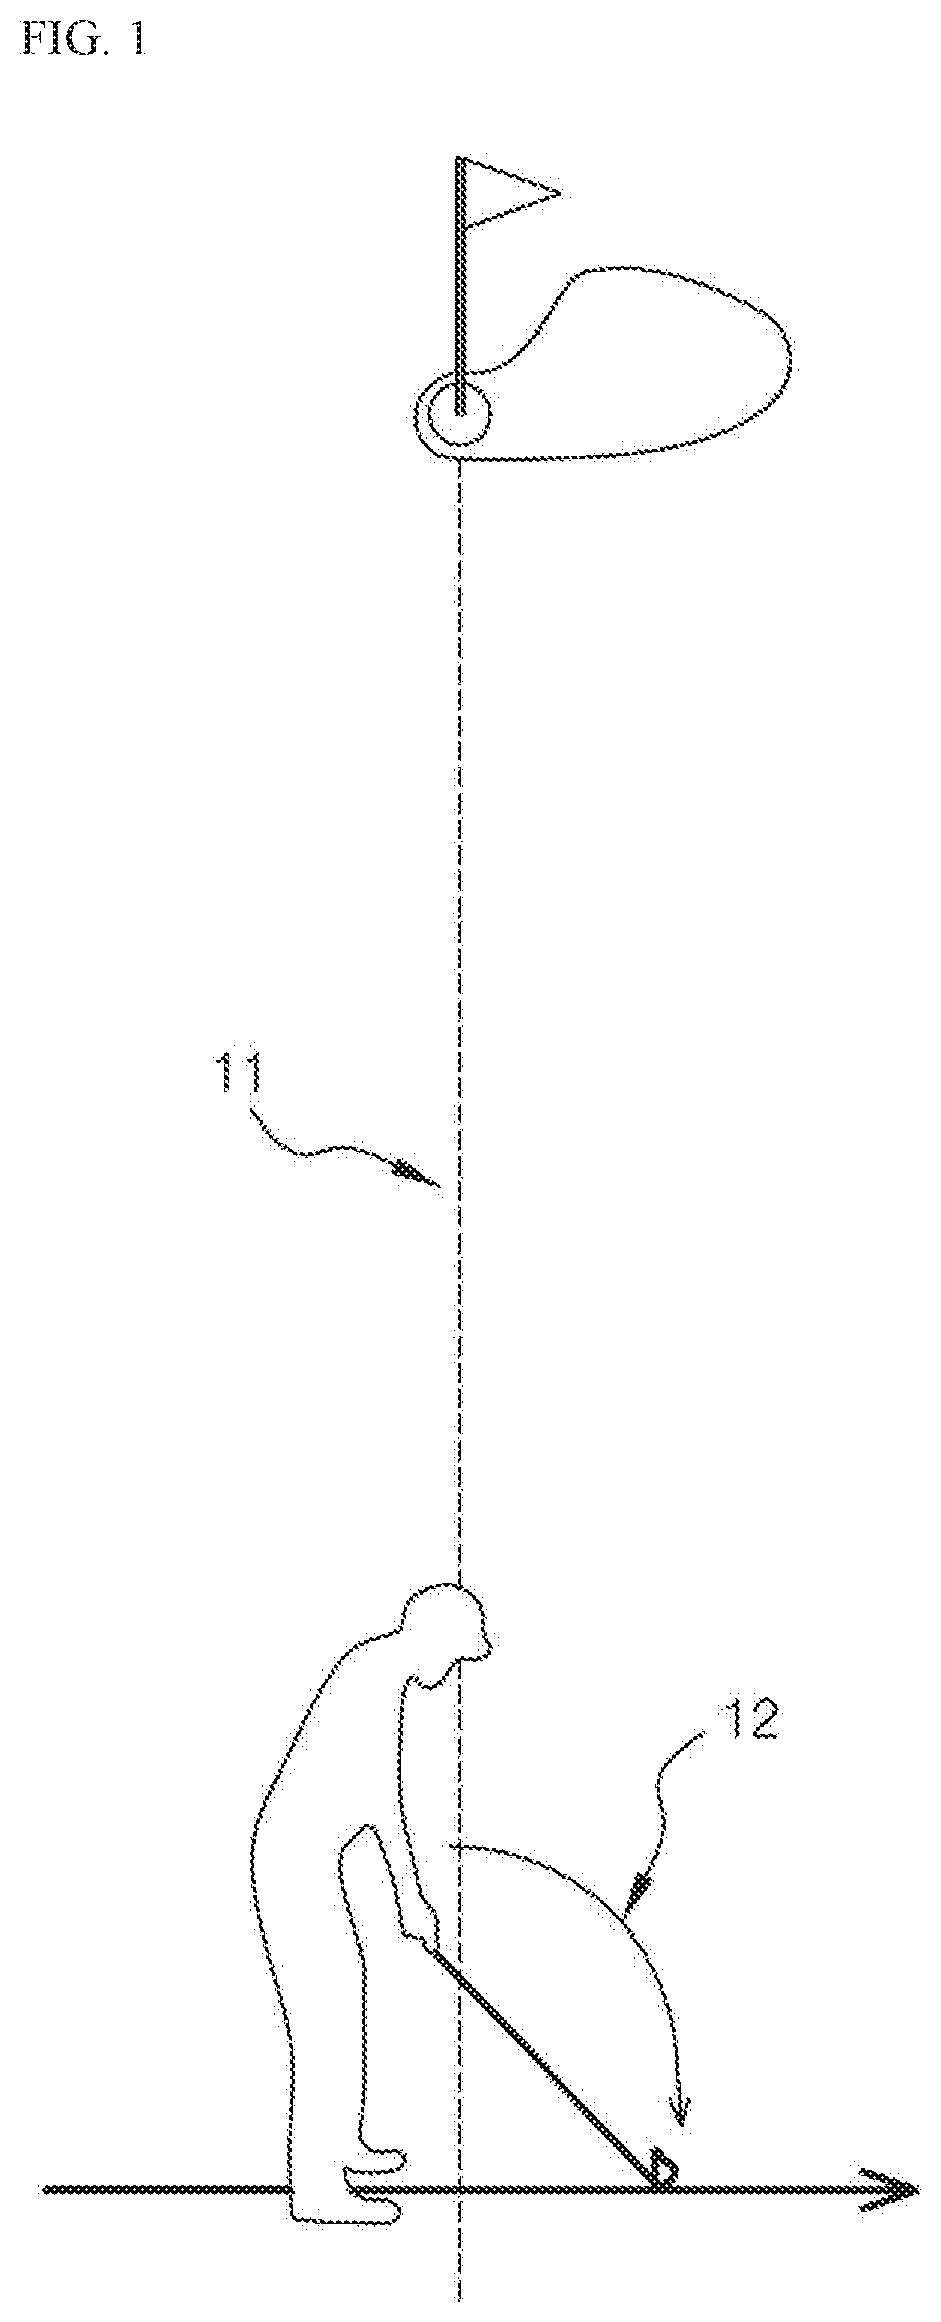 Golf eyeglasses for assisting directional alignment and method for operating same